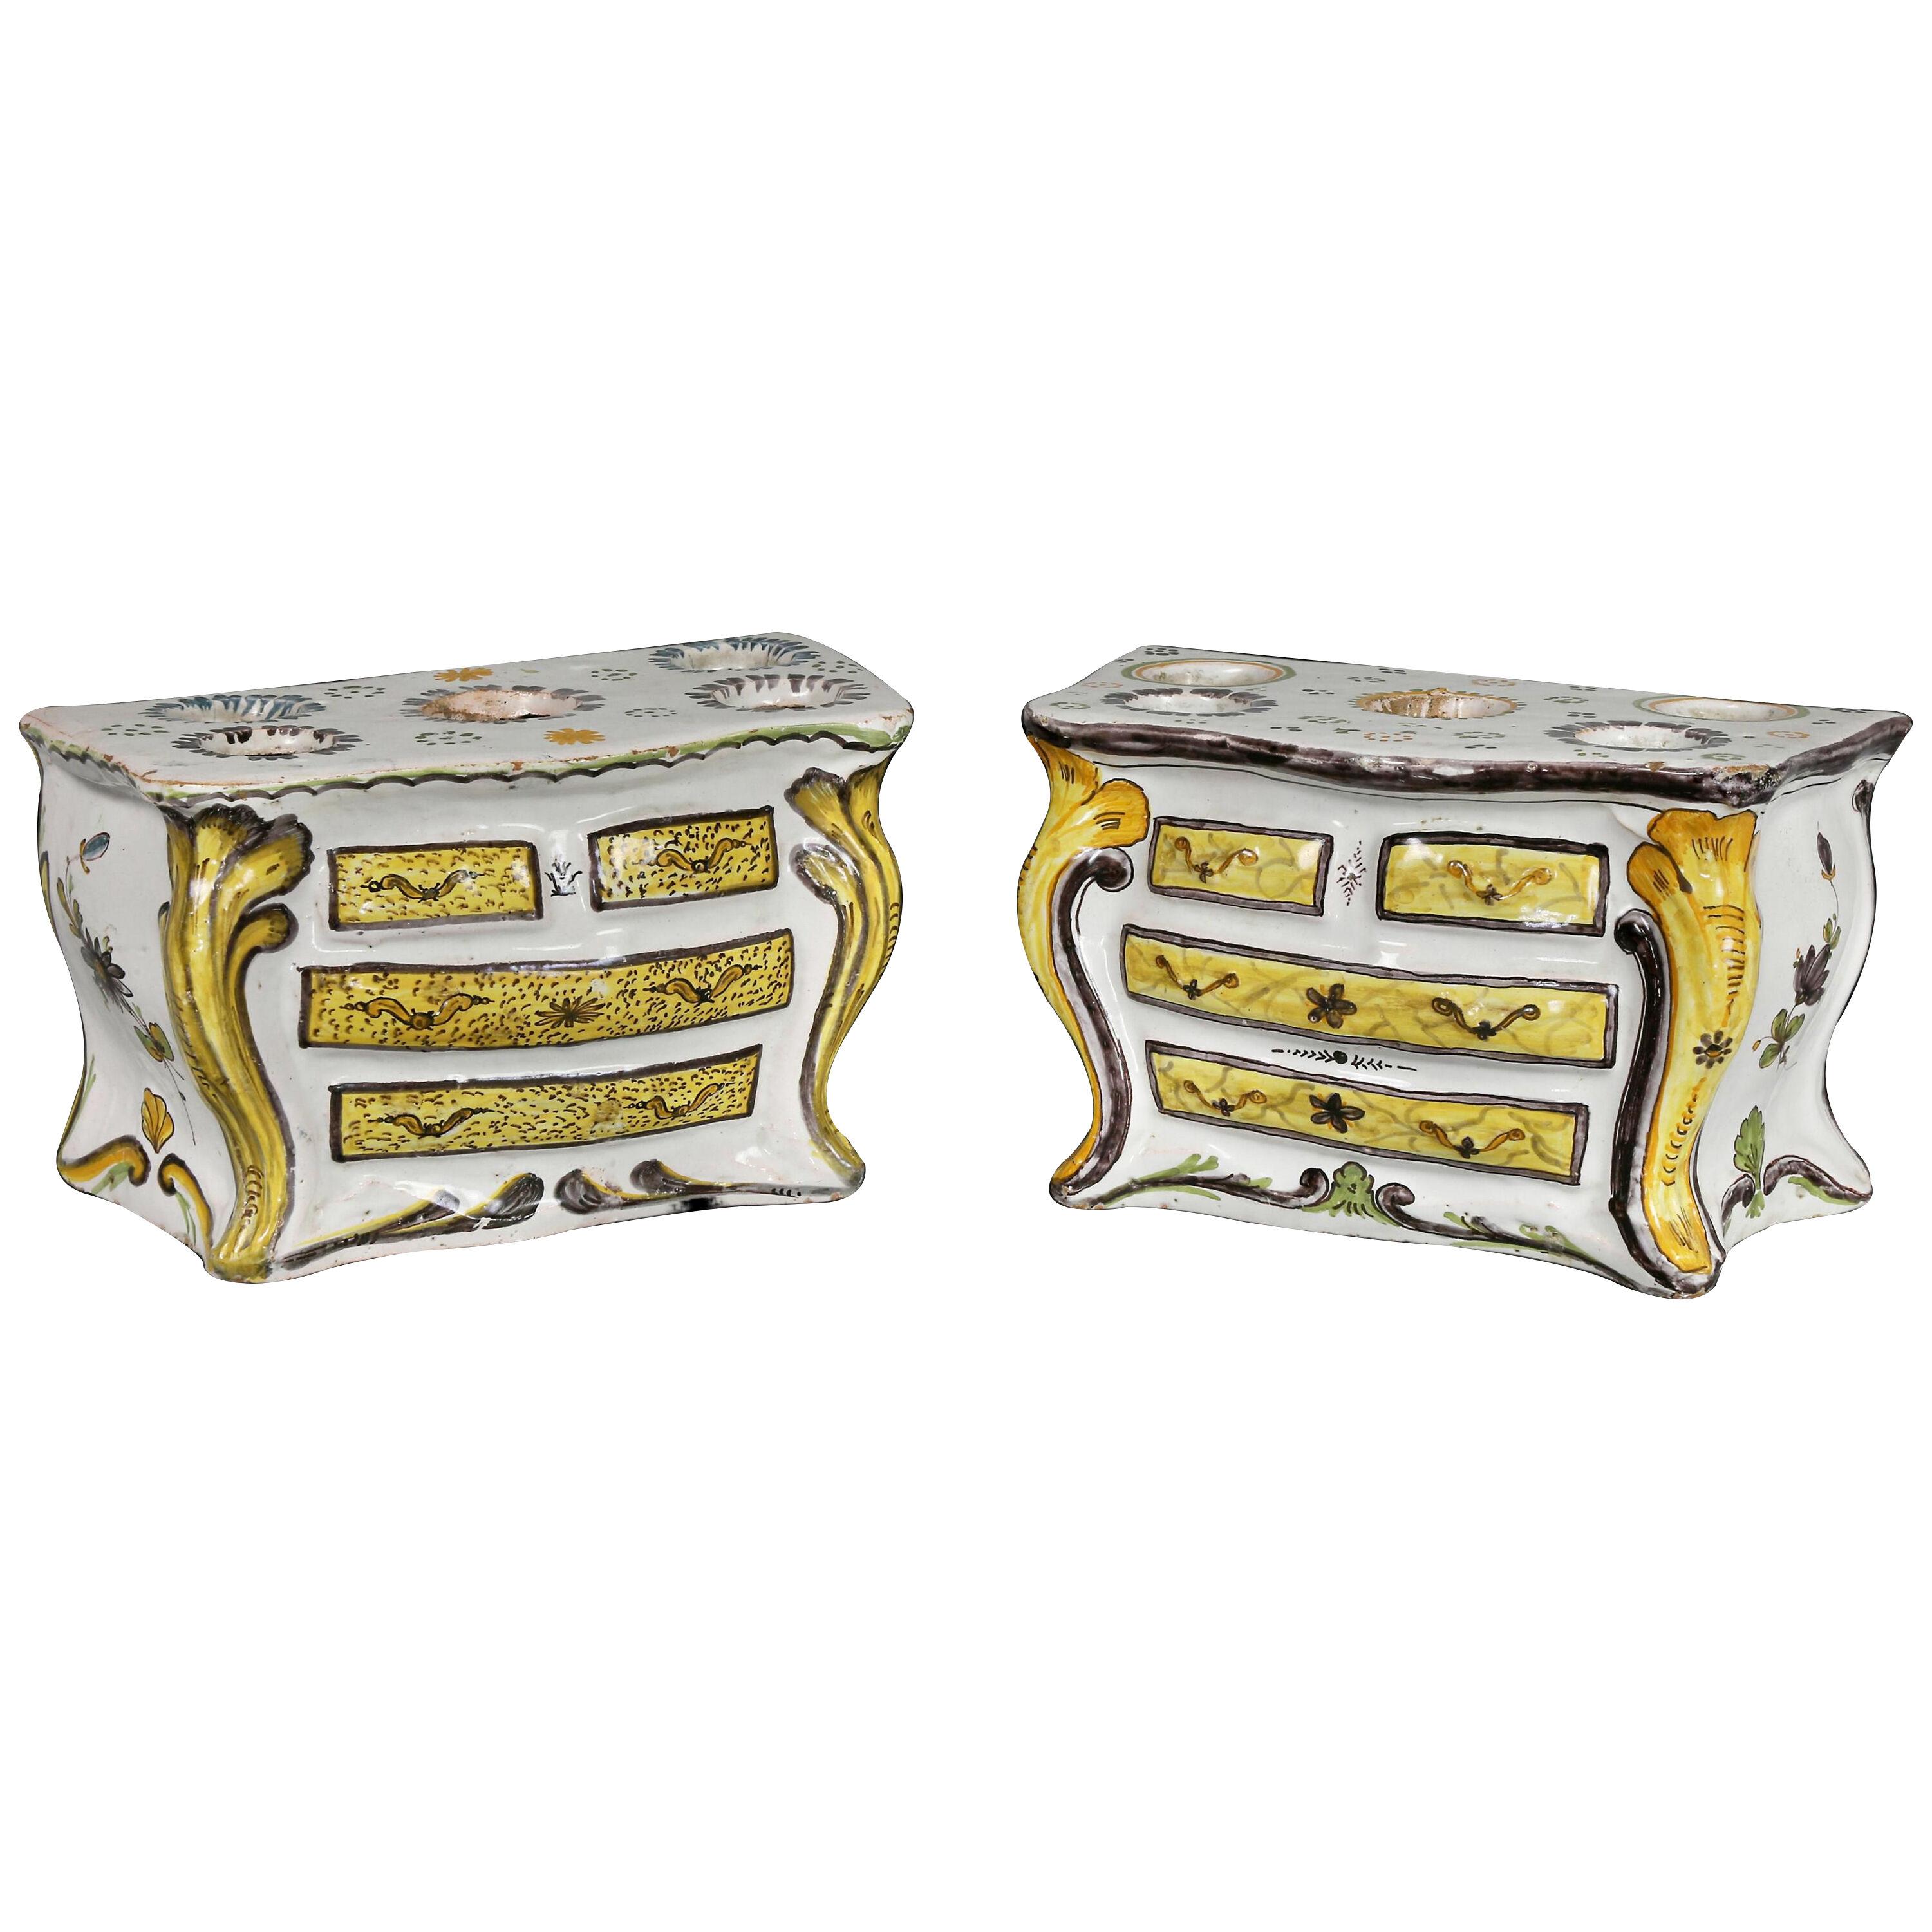 French Faience Bough Pots in the Form of Commodes - a Pair